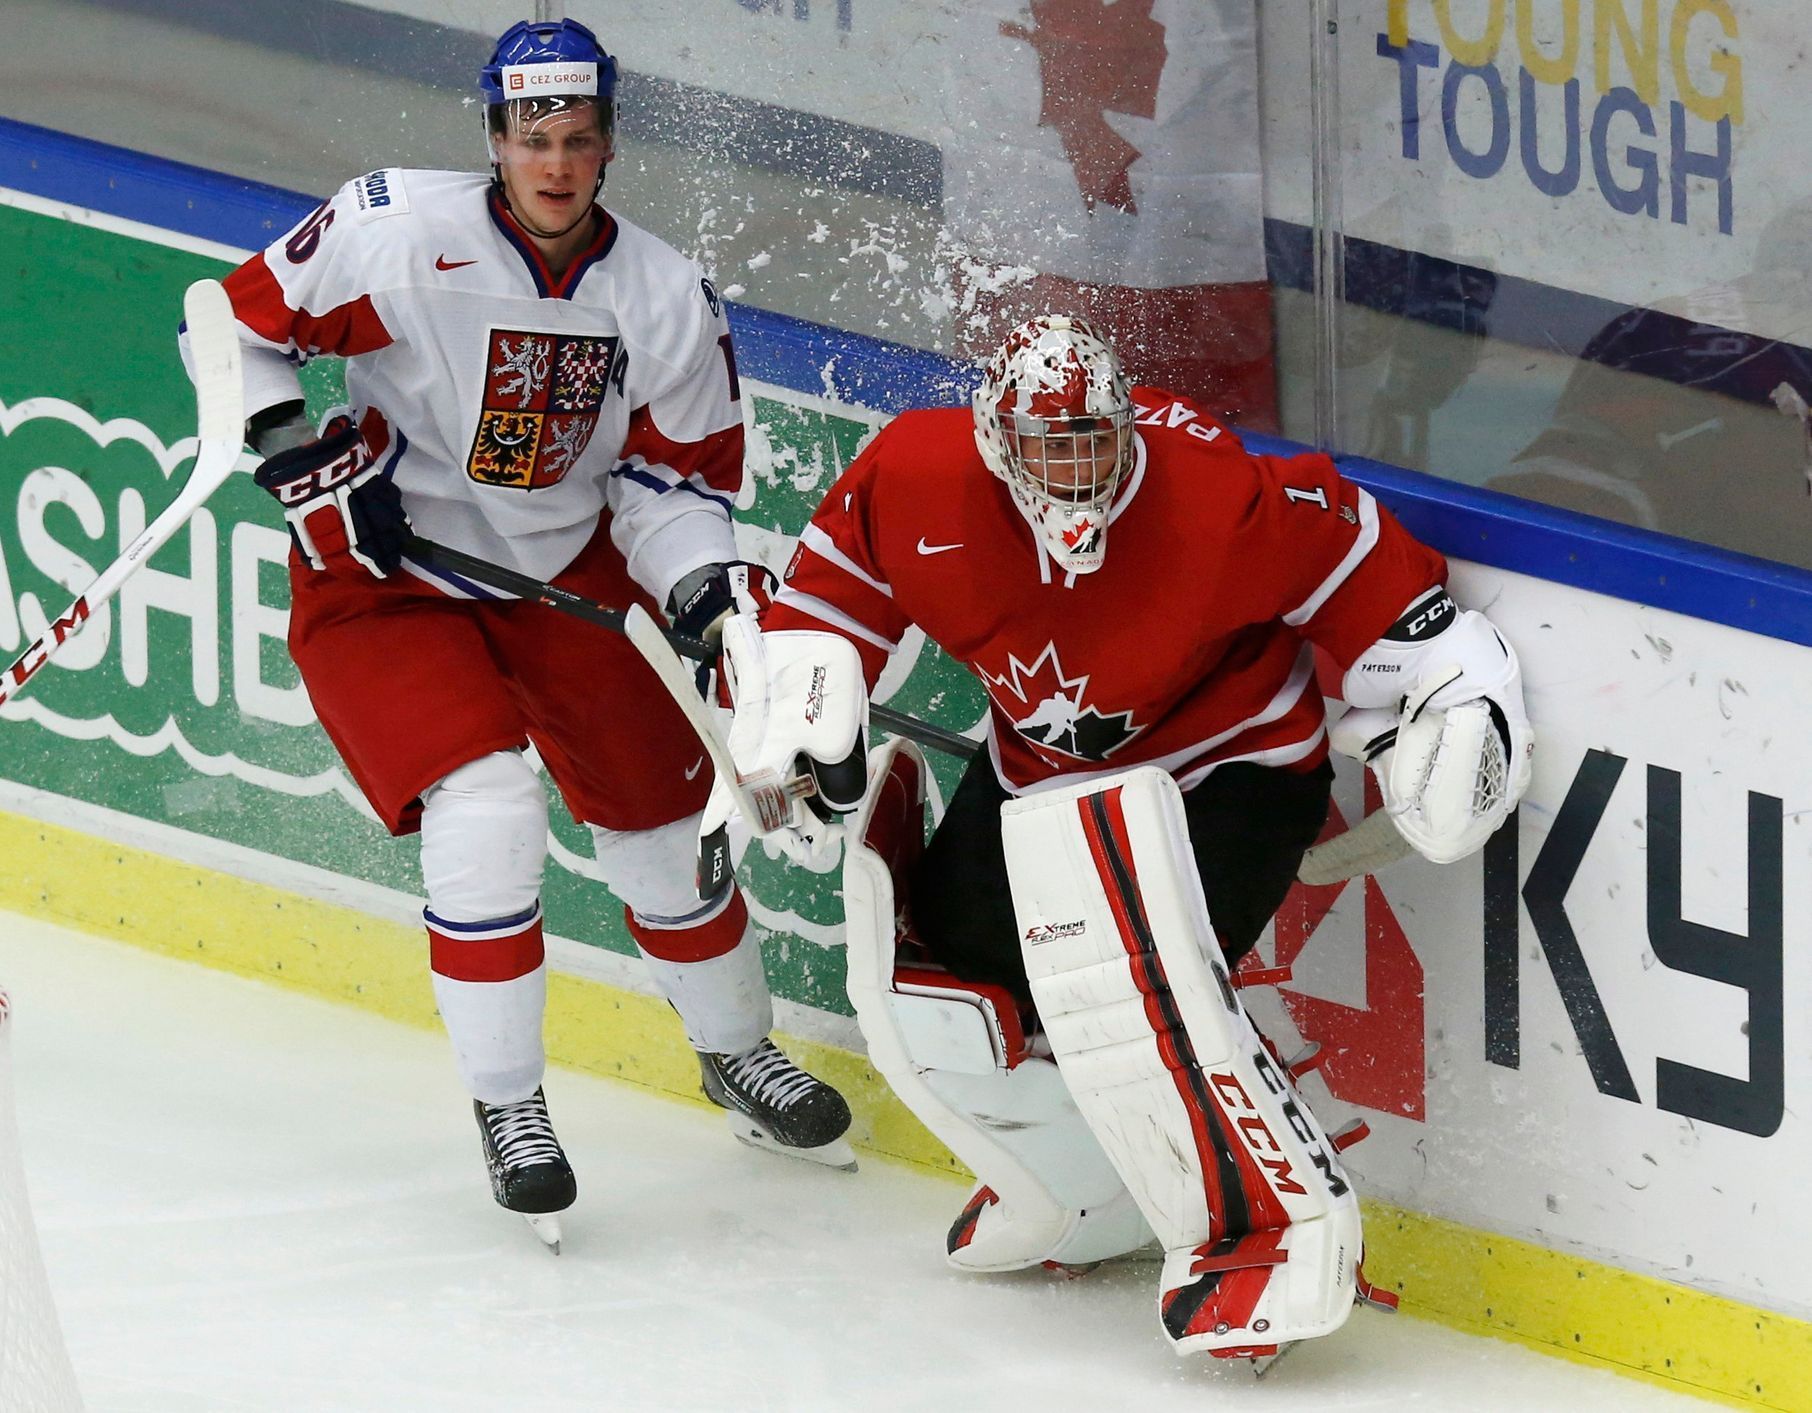 Czech Republic's Faksa and Canada's goalie Paterson bump behind the net while clearing the puck during the second period of their IIHF World Junior Championship ice hockey game in Malmo